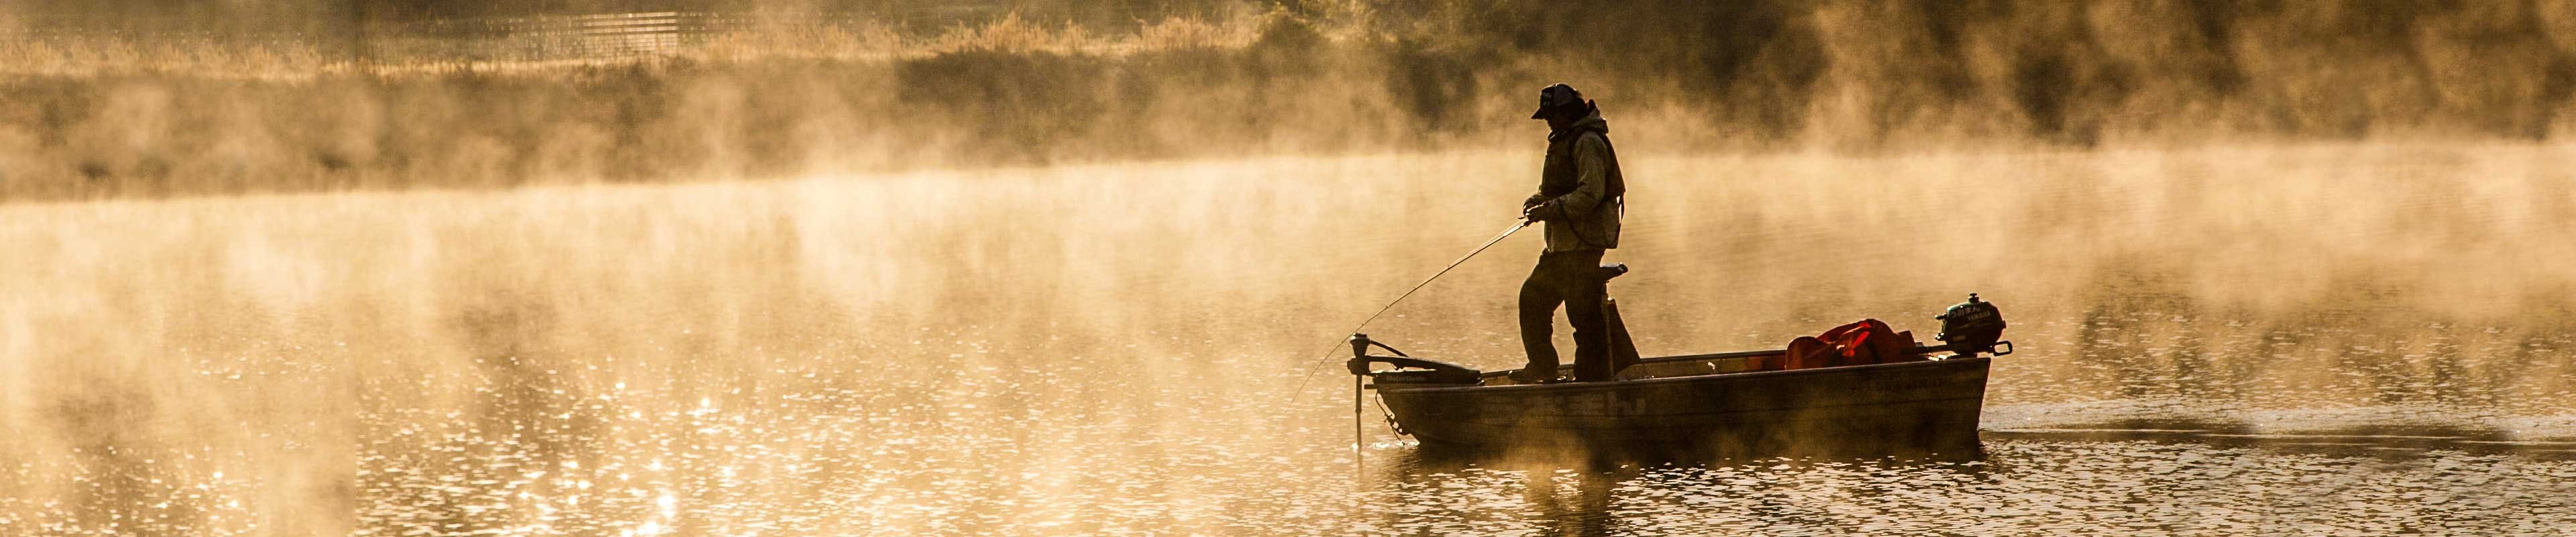 Man fishing in his bass boat